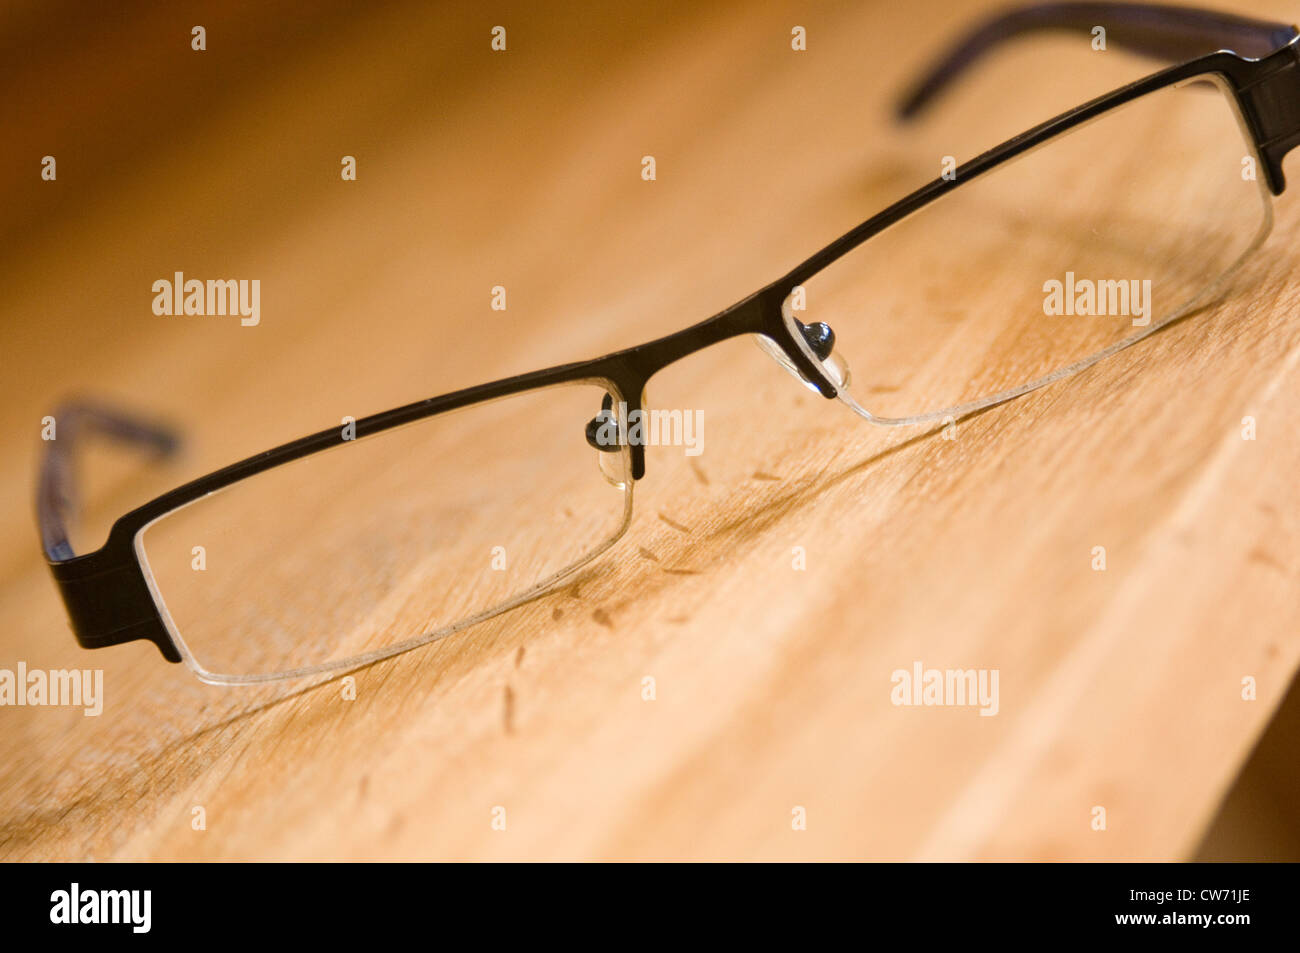 https://c8.alamy.com/comp/CW71JE/thin-rimmed-small-glasses-spectacles-frame-black-look-looking-intellectual-CW71JE.jpg